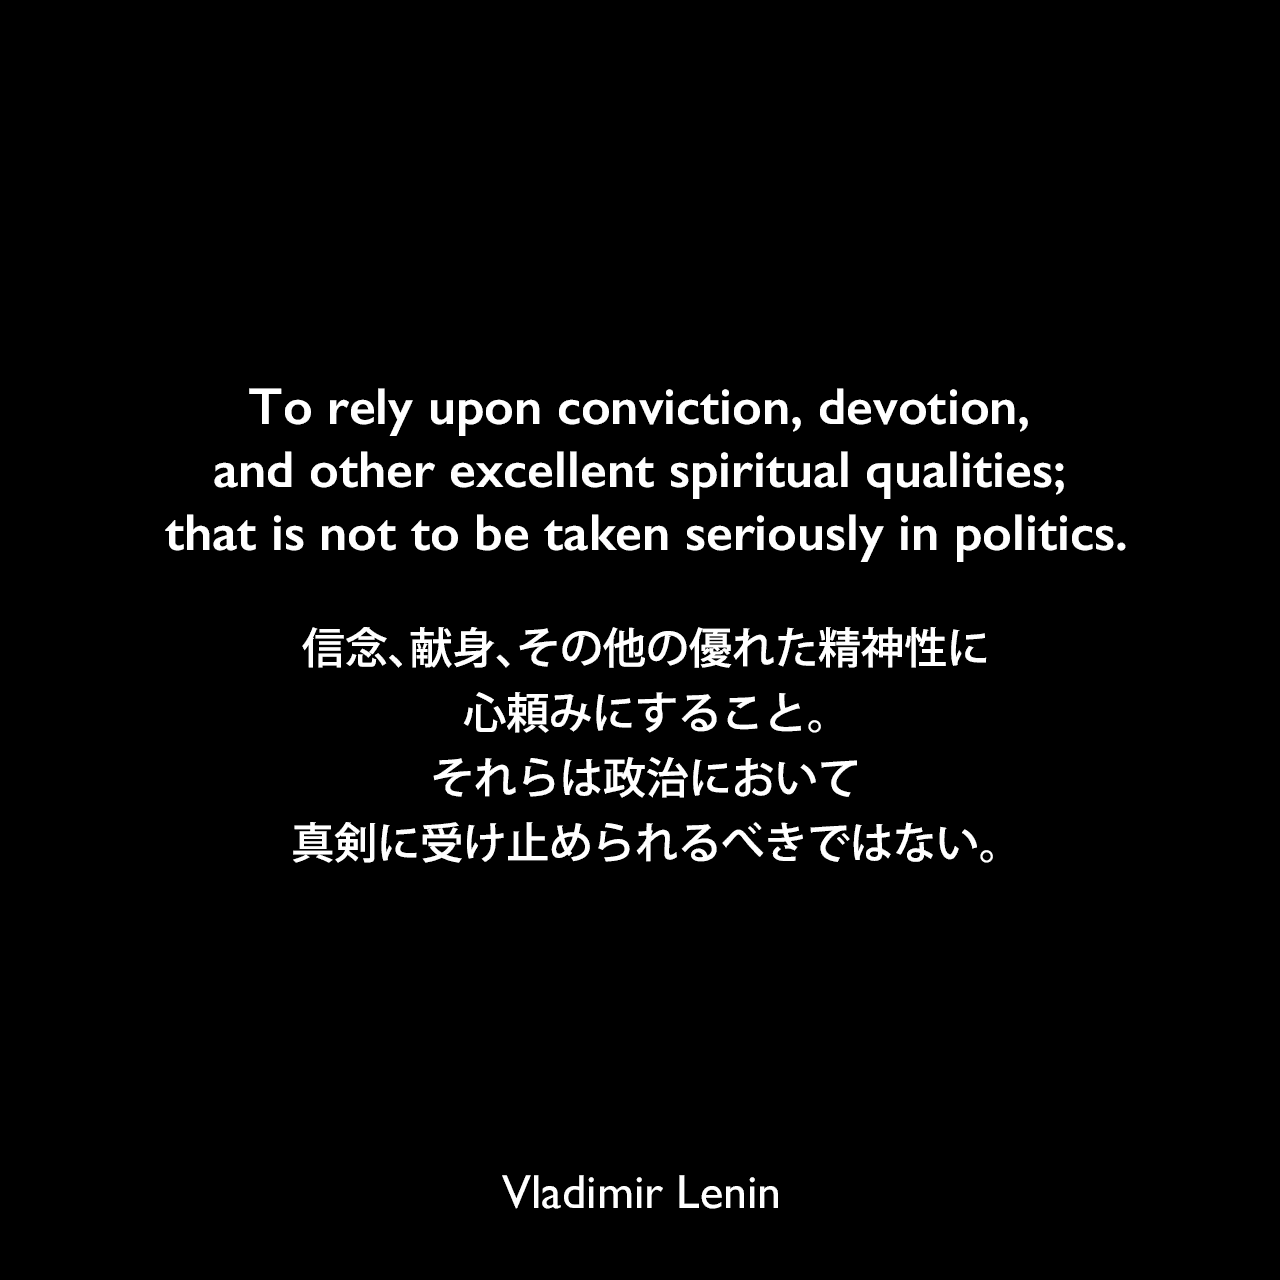 To rely upon conviction, devotion, and other excellent spiritual qualities; that is not to be taken seriously in politics.信念、献身、その他の優れた精神性に心頼みにすること。それらは政治において真剣に受け止められるべきではない。Vladimir Lenin